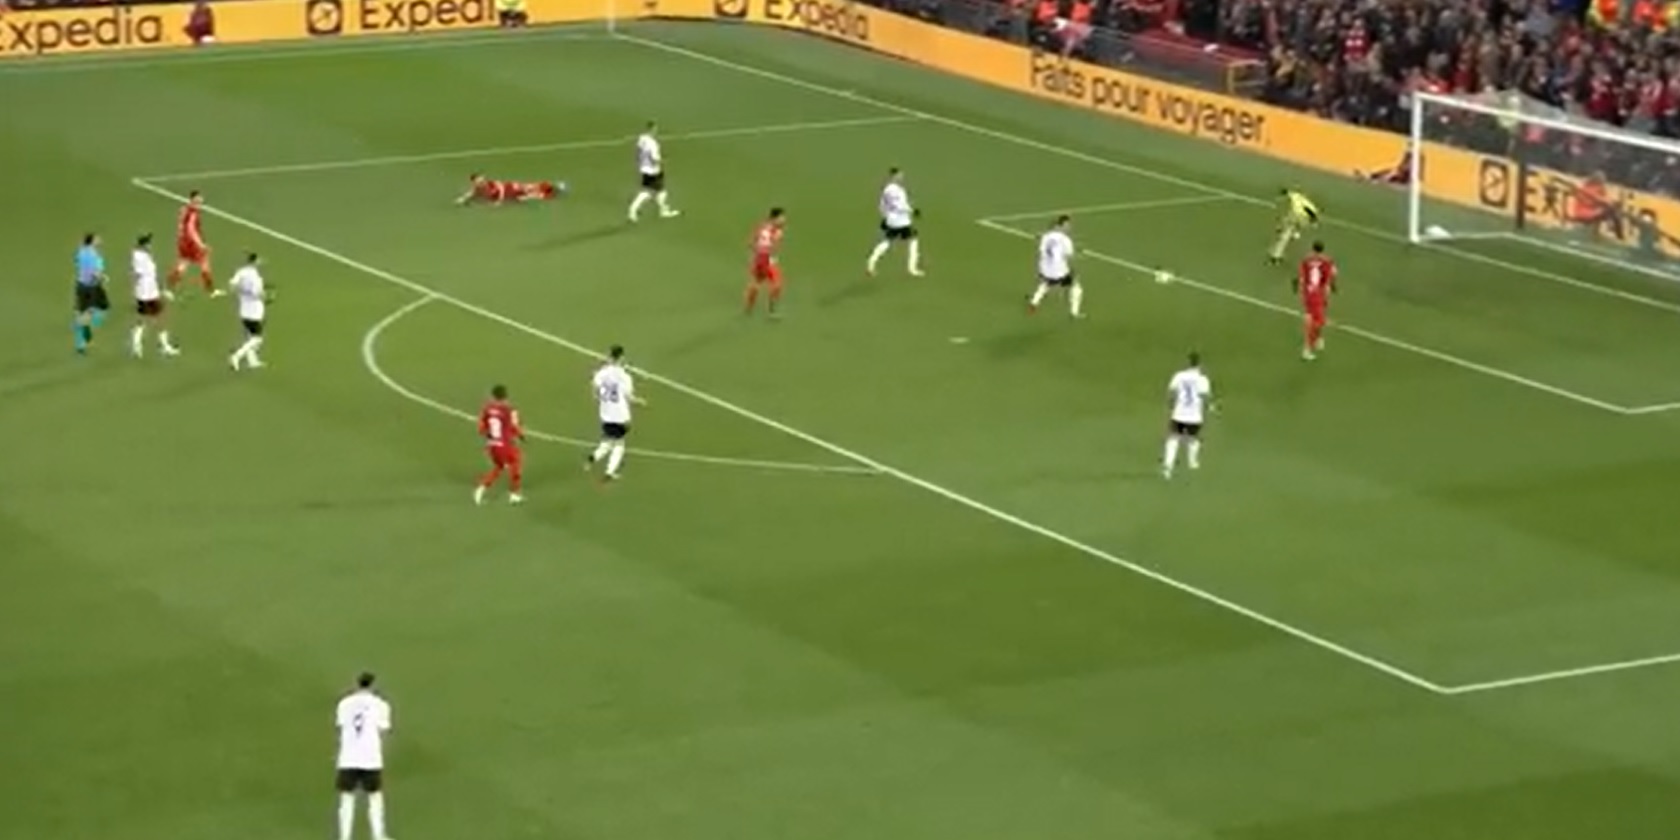 (Video) Comedy of errors hands Liverpool second goal with Firmino taking advantage of clownish Benfica defending